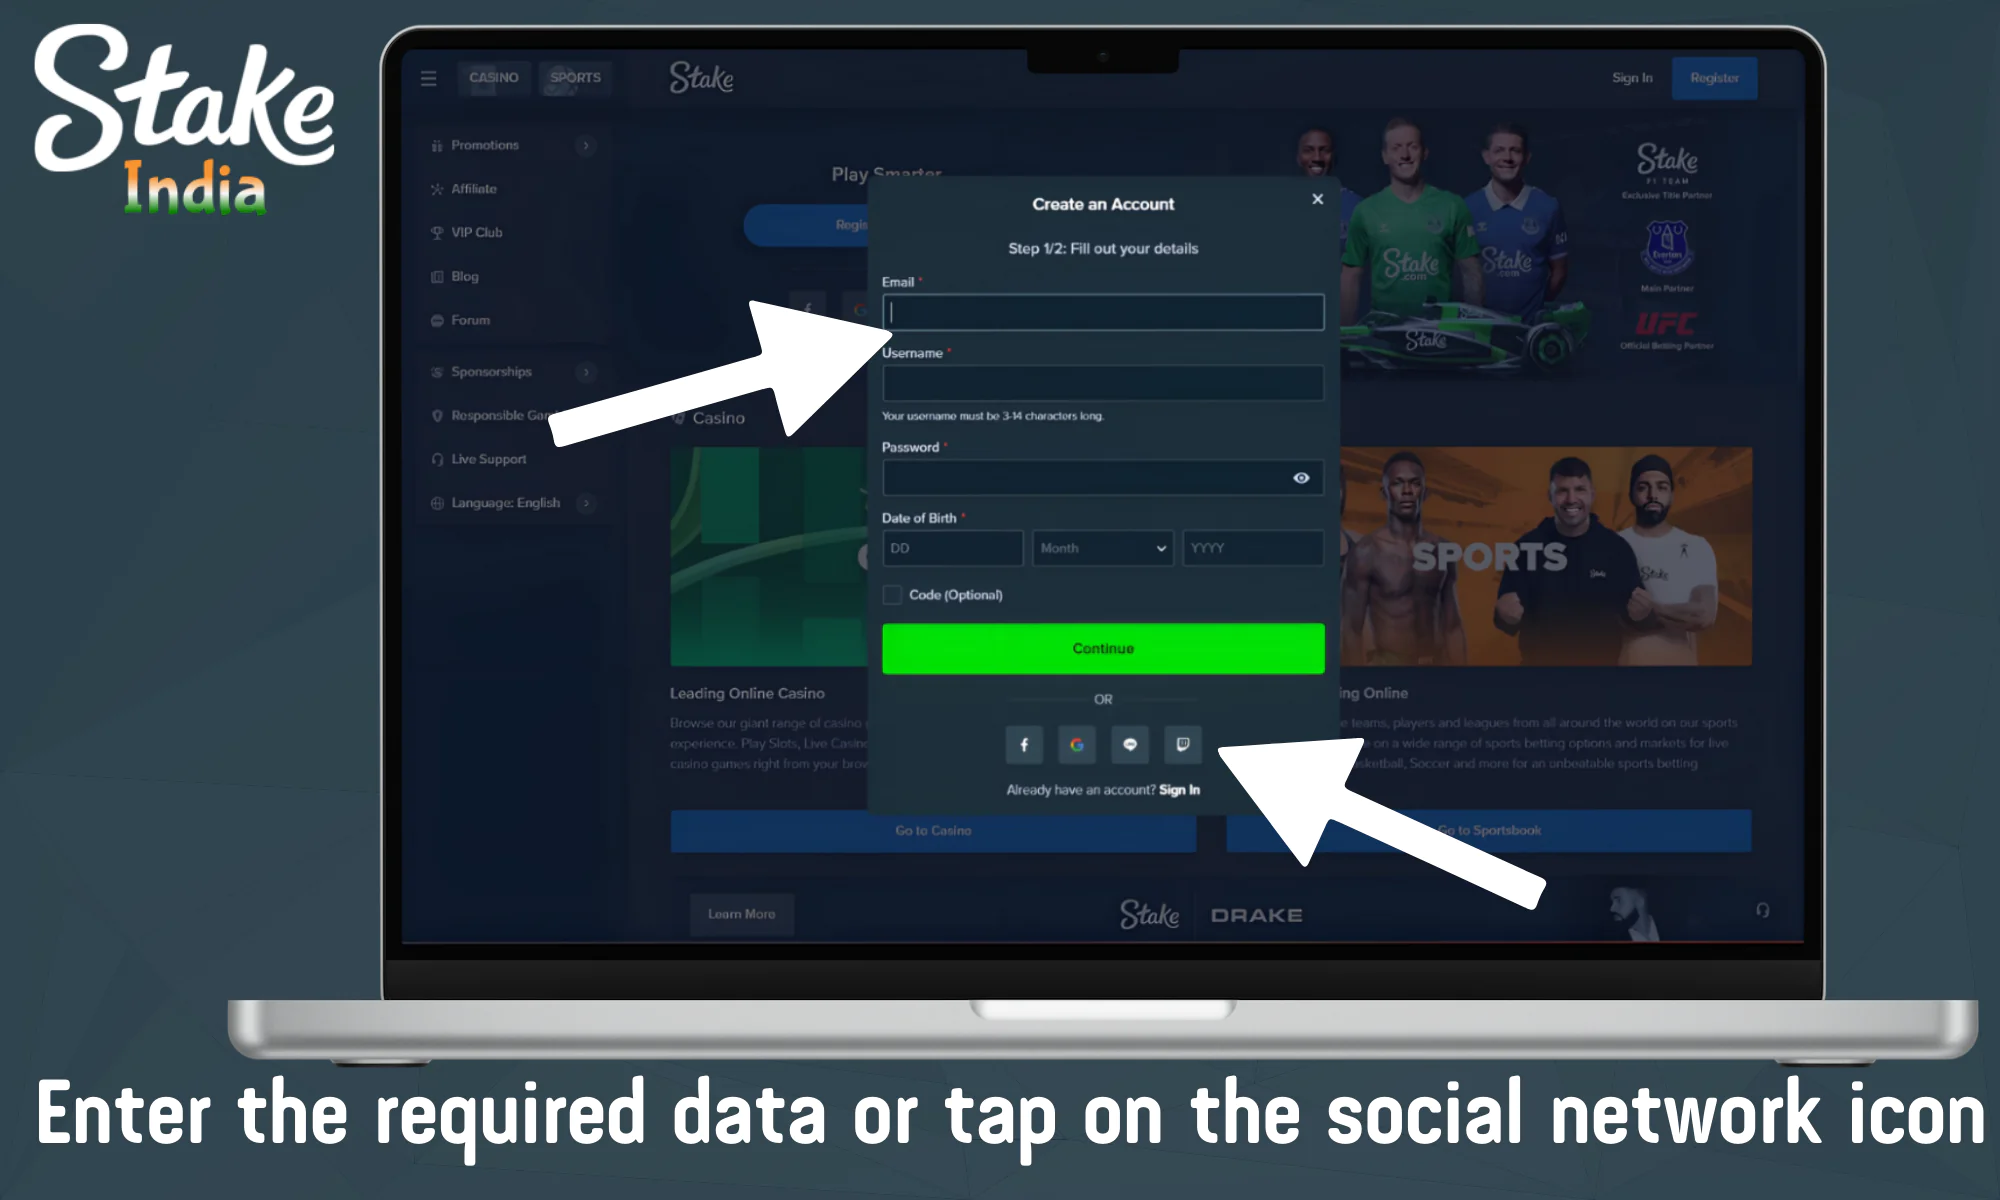 Enter your details or use the social media login icon